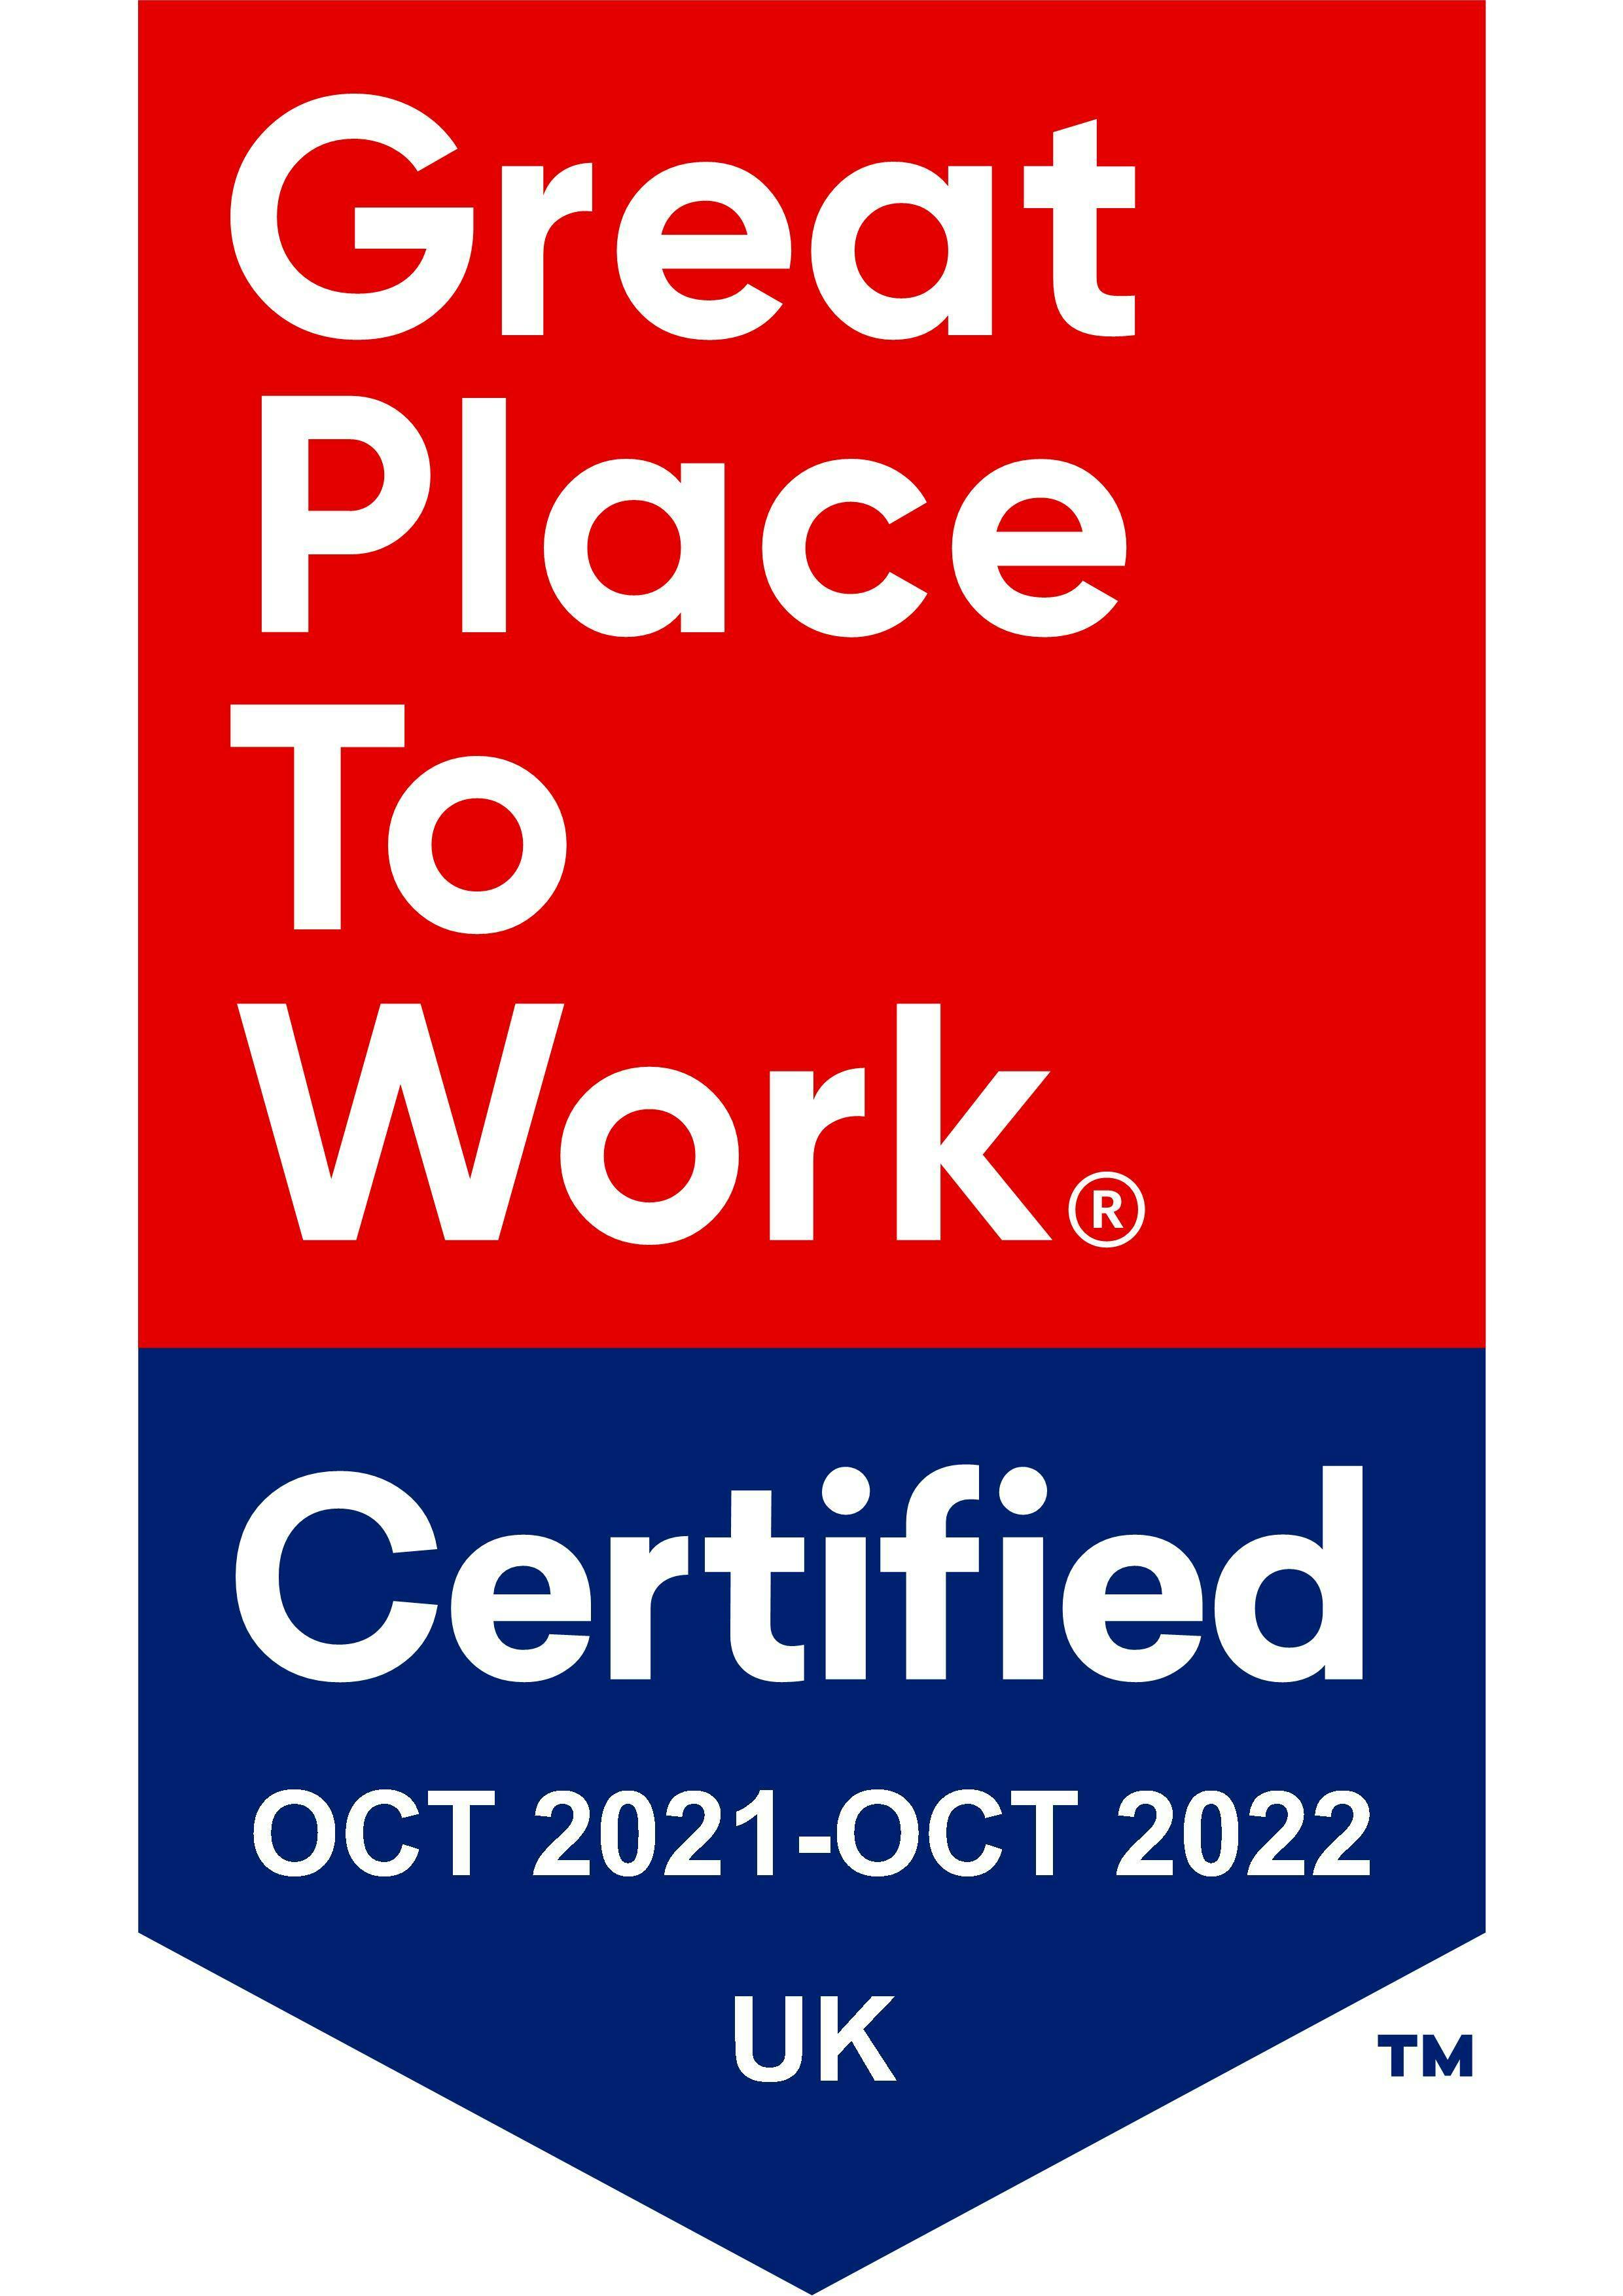 6B is a certified Great Place to Work